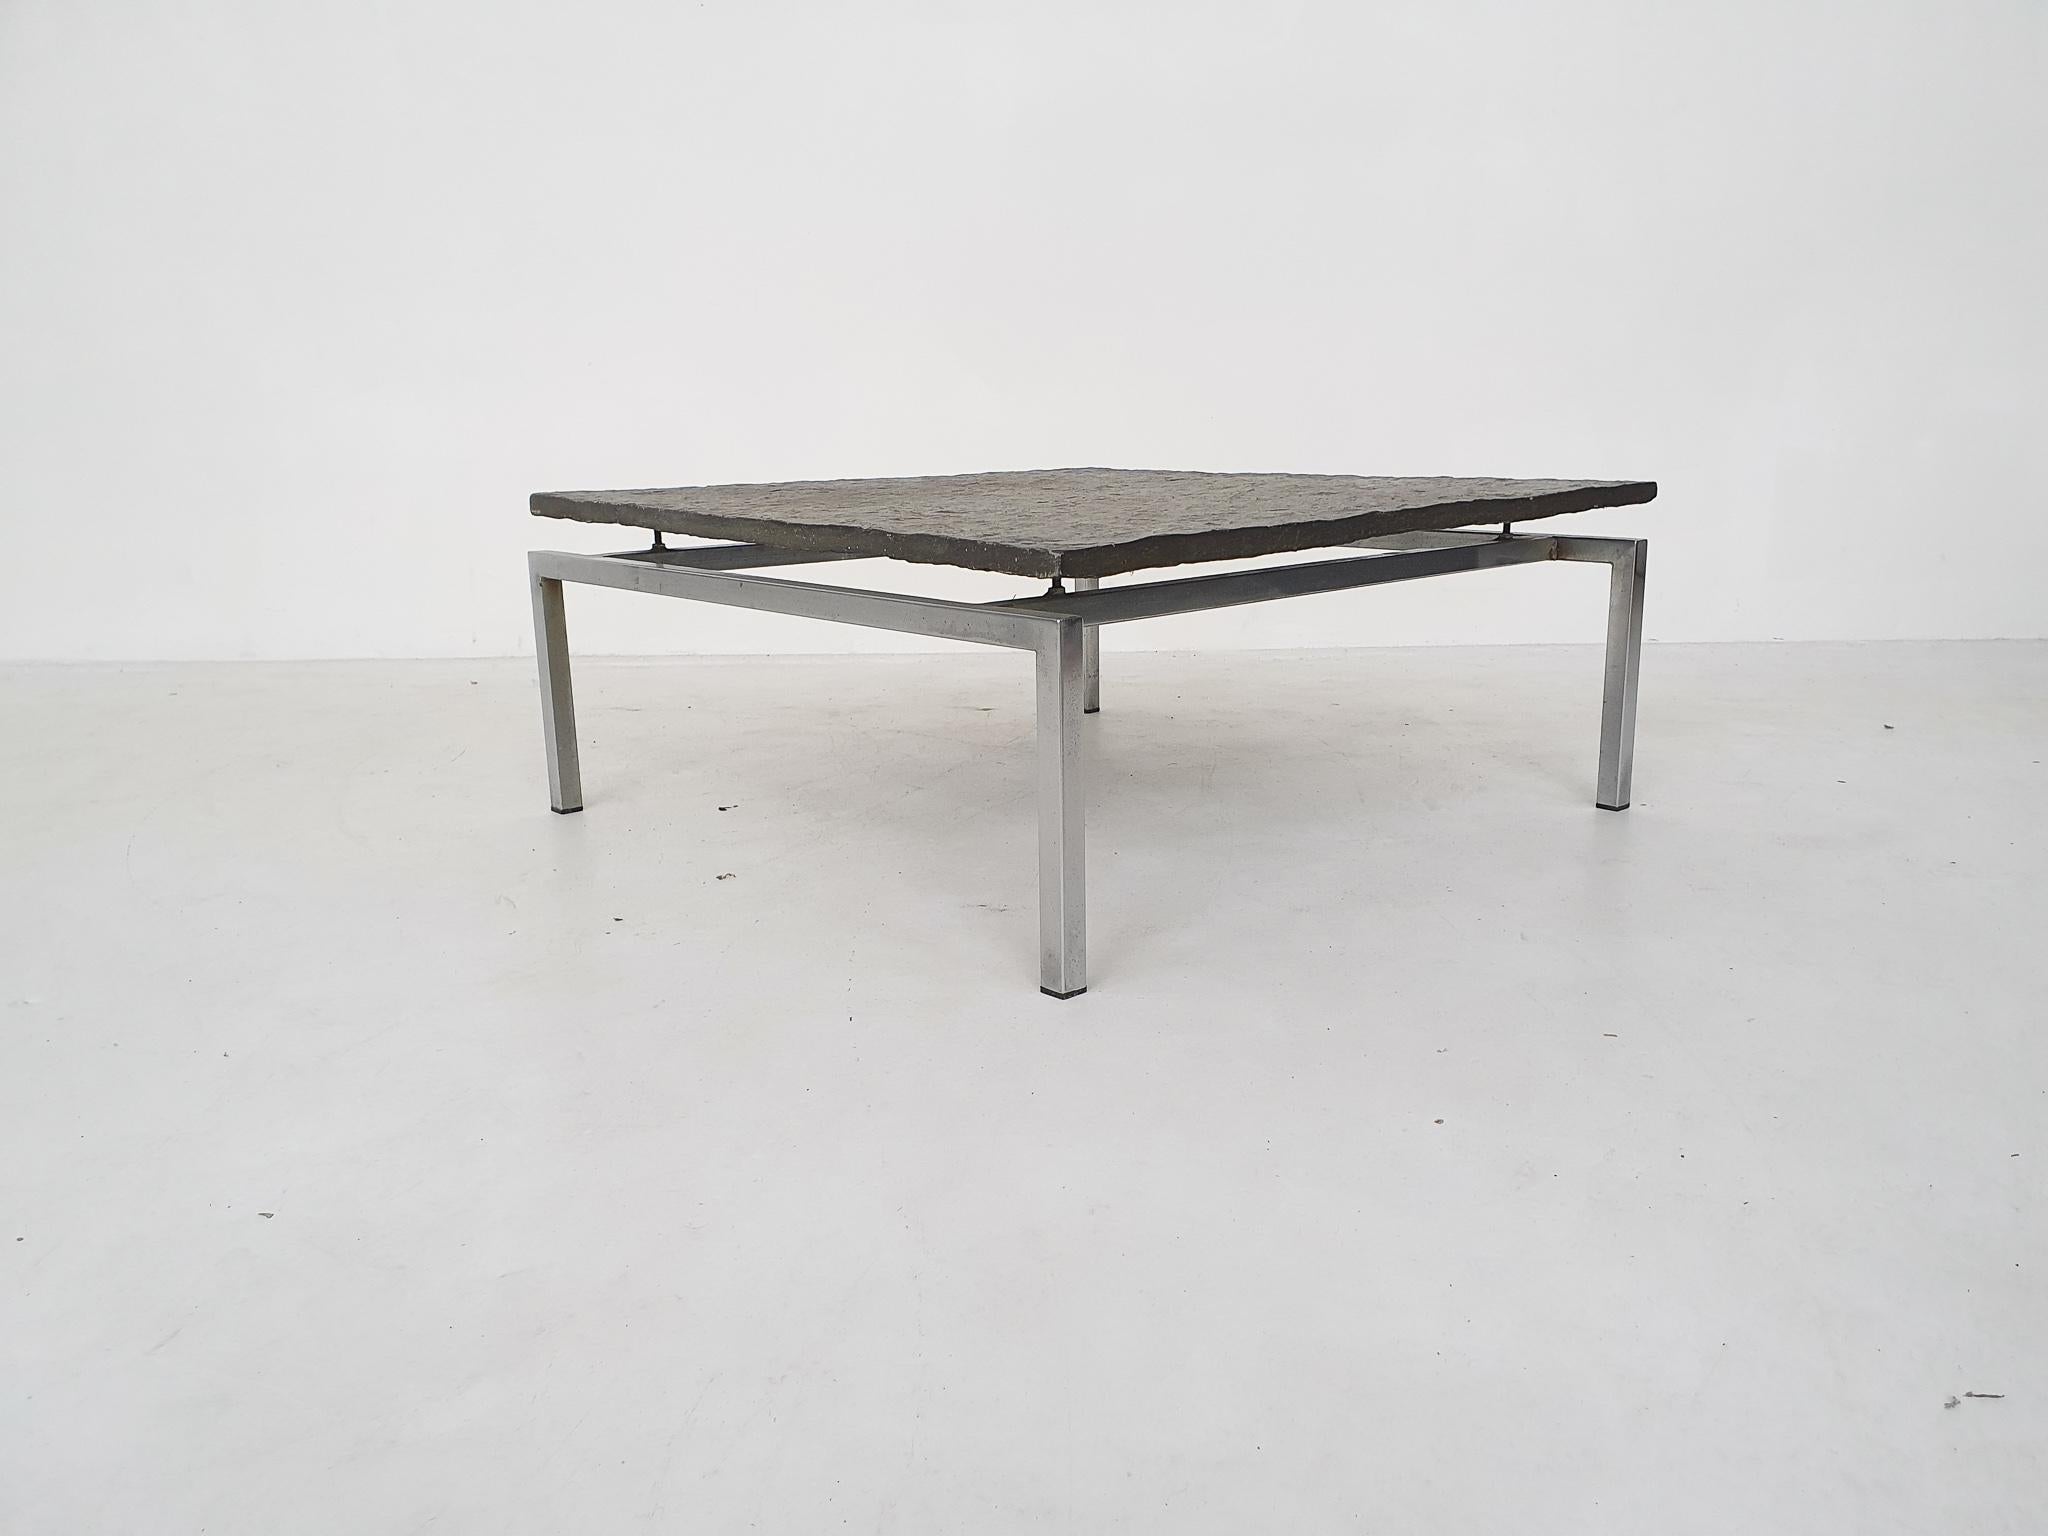 Dutch modern Brutalist slate and steel coffee tables, 1950s.

Heavy slate top resting on an iron frame. The slate top has a unique natural pattern. The table is made in the Netherlands, approximately around the 70's. The style is in the matter of